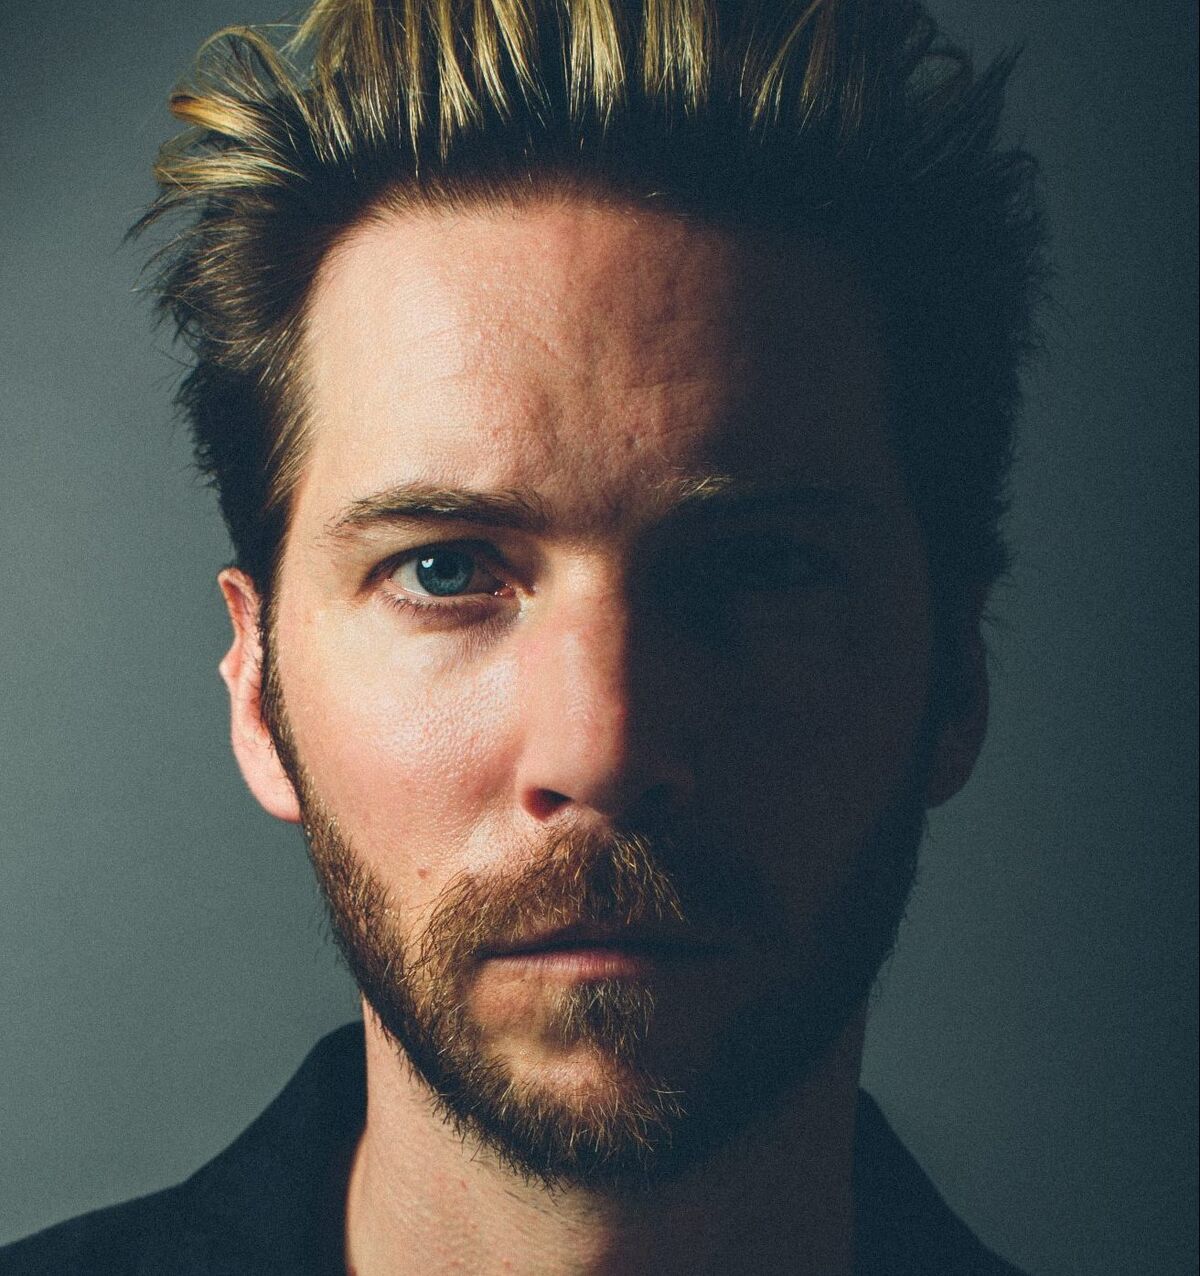 Troy Baker - Commercial Voice Over, American Actor and Musician